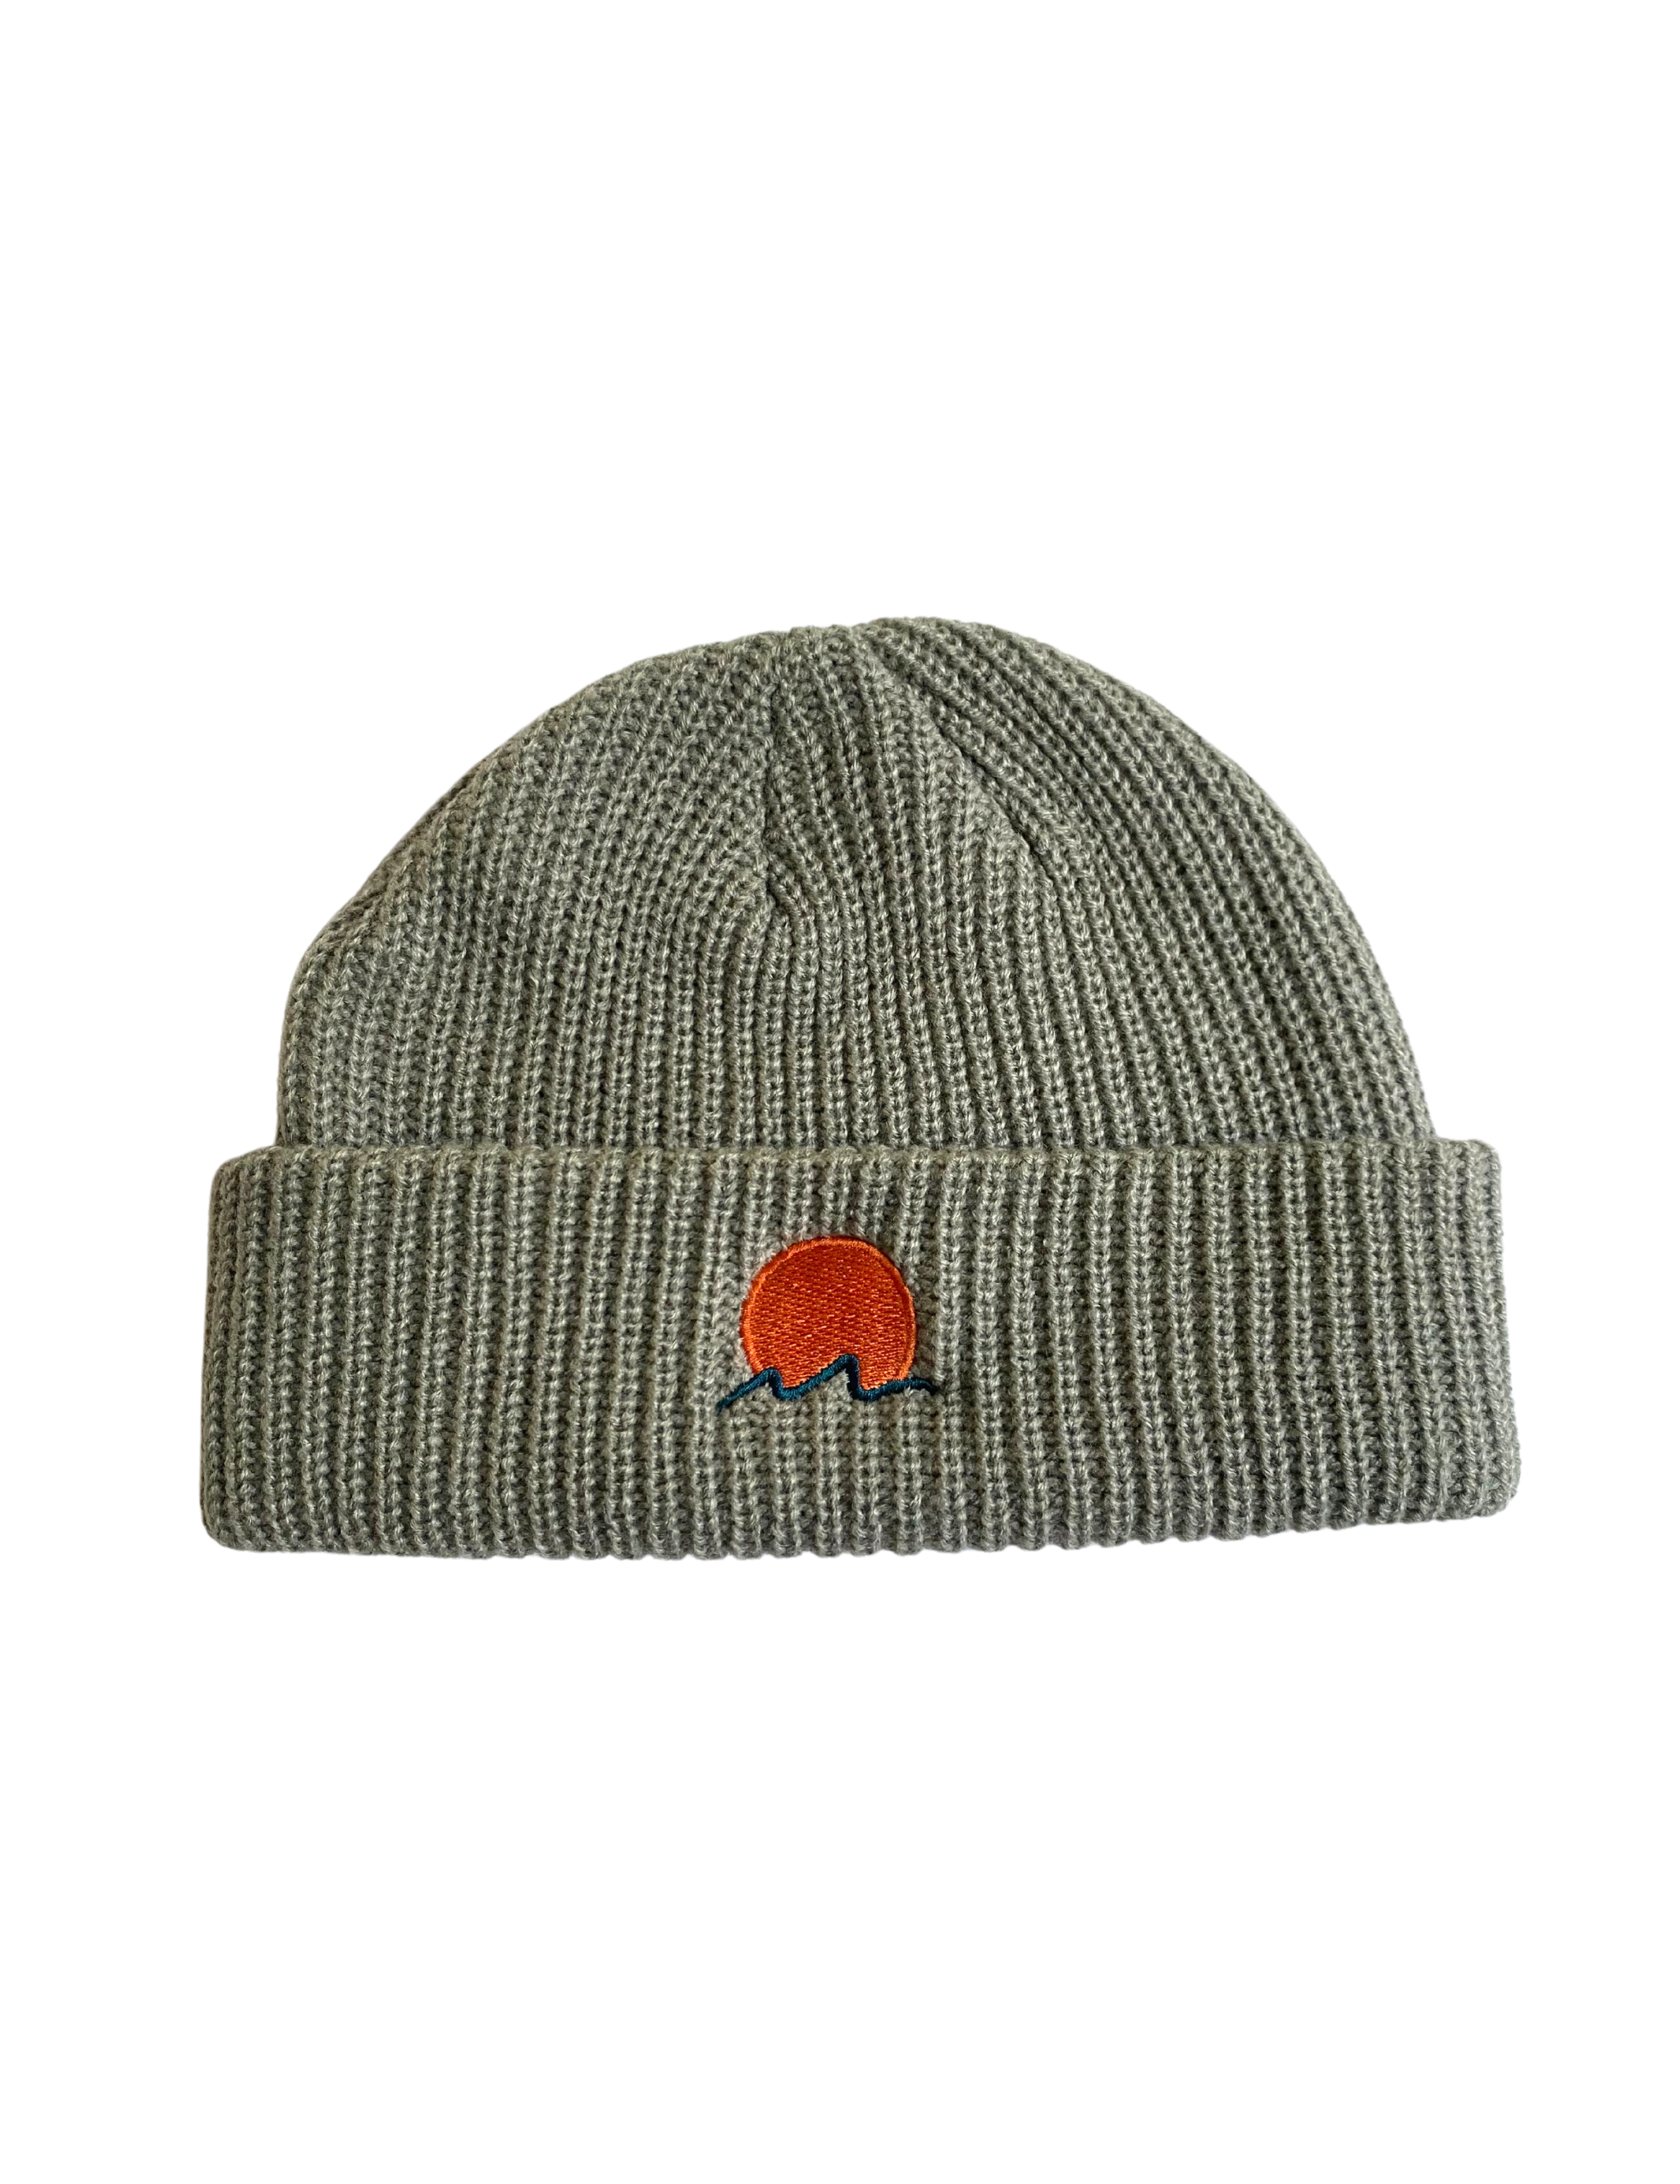 Classic cuffed knit fisherman beanie featuring embroidered Rooted Swim sunset logo in a soft green gray color. high quality knit beanie